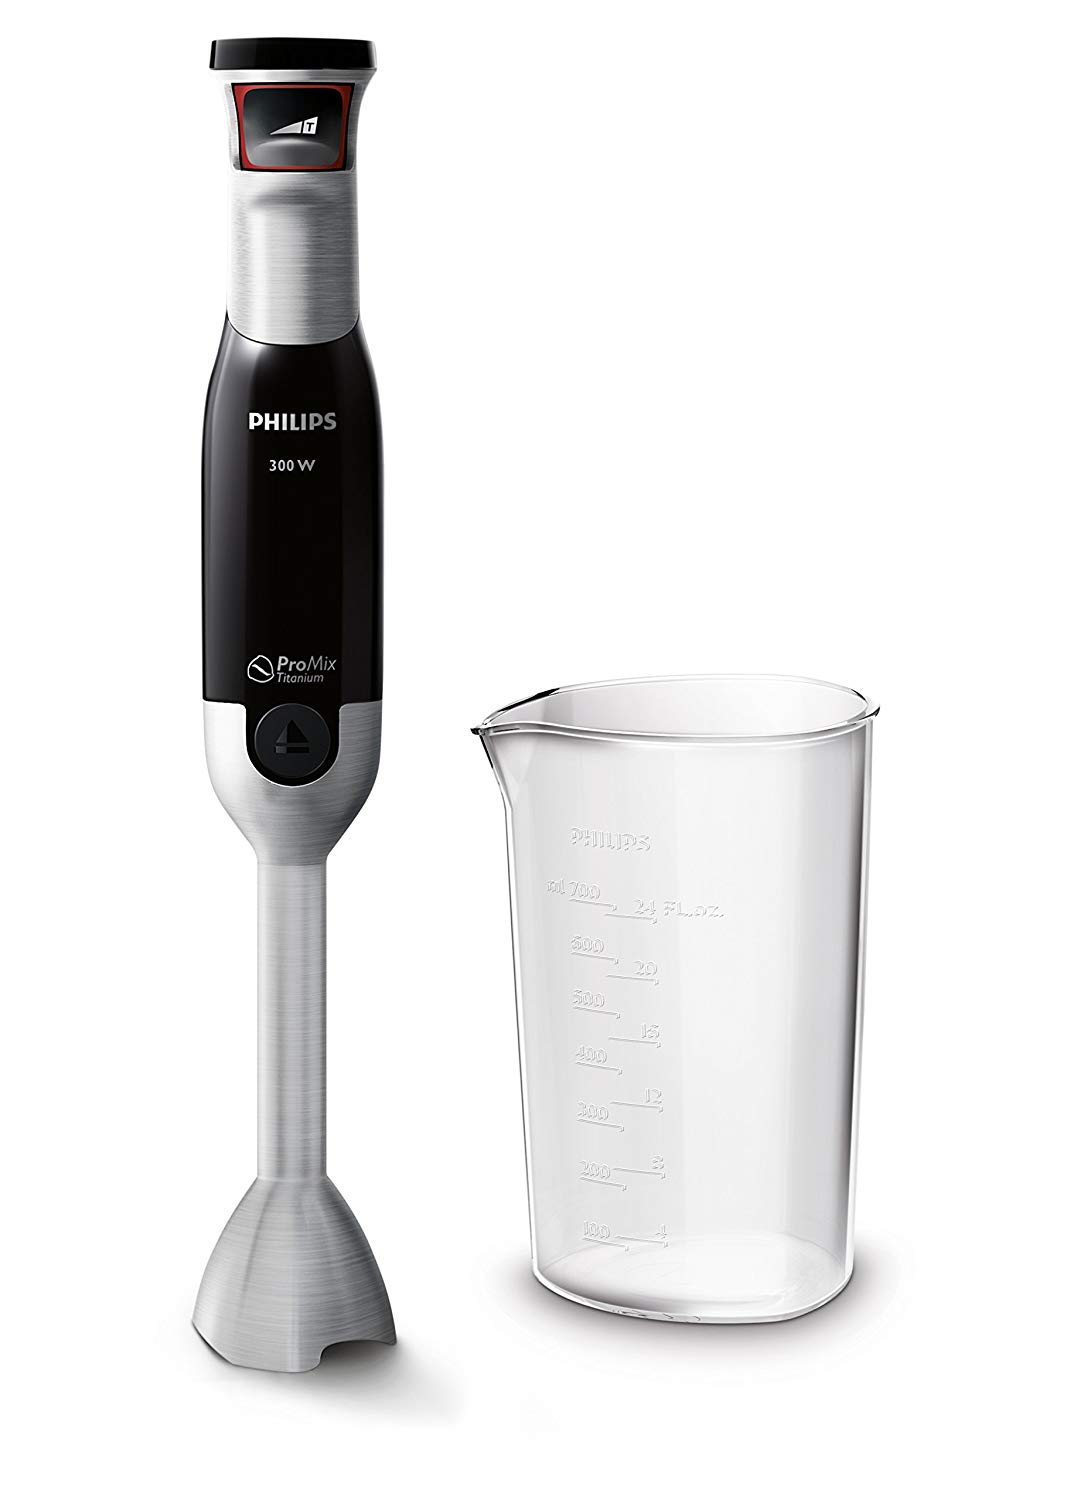 Philips ProMix Hand Blender Review